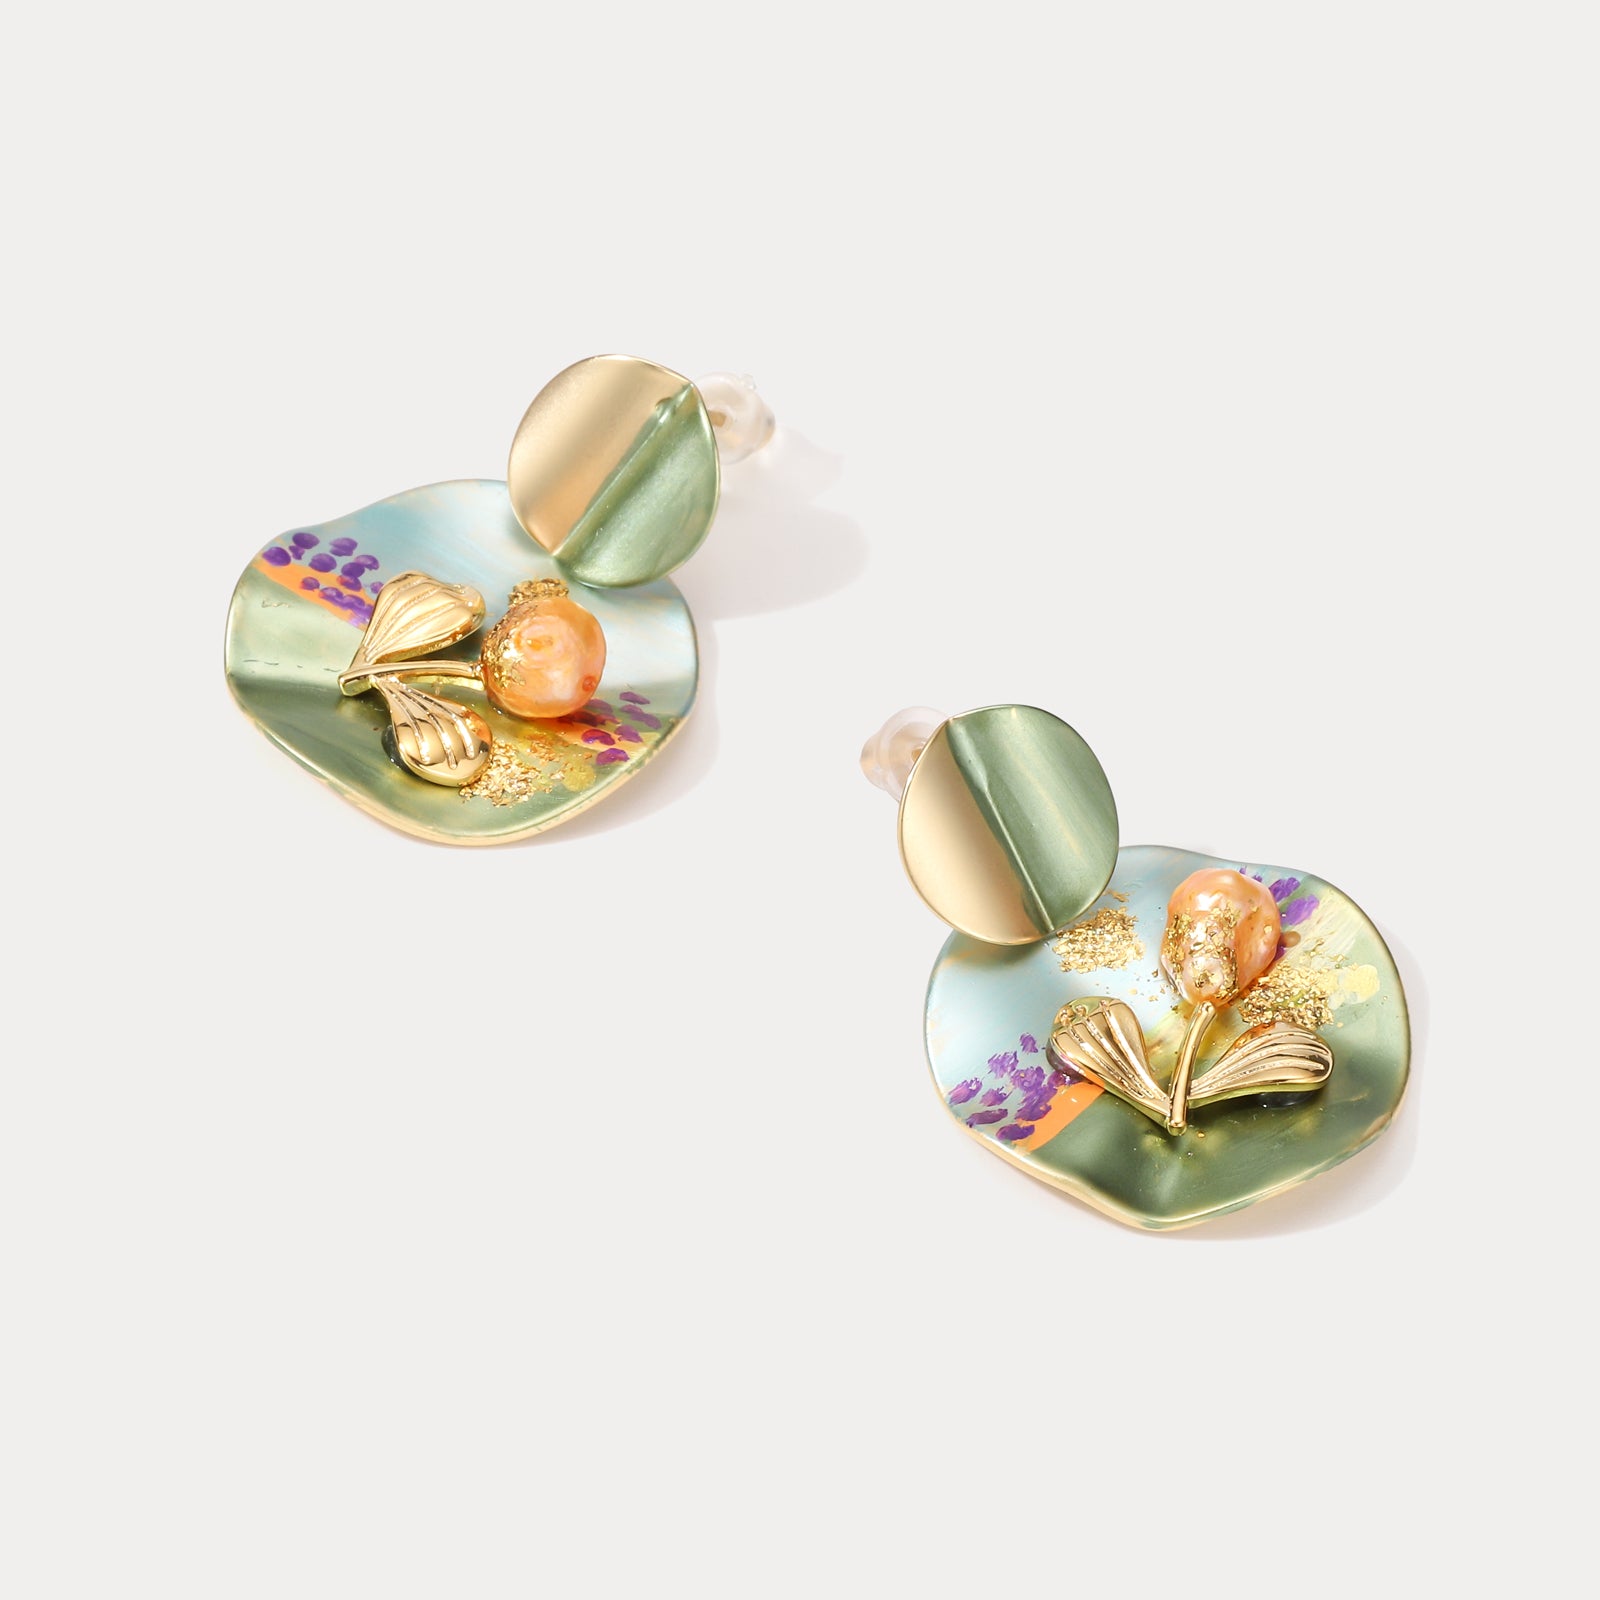 Idyllic Floral Dripping Oil Earrings